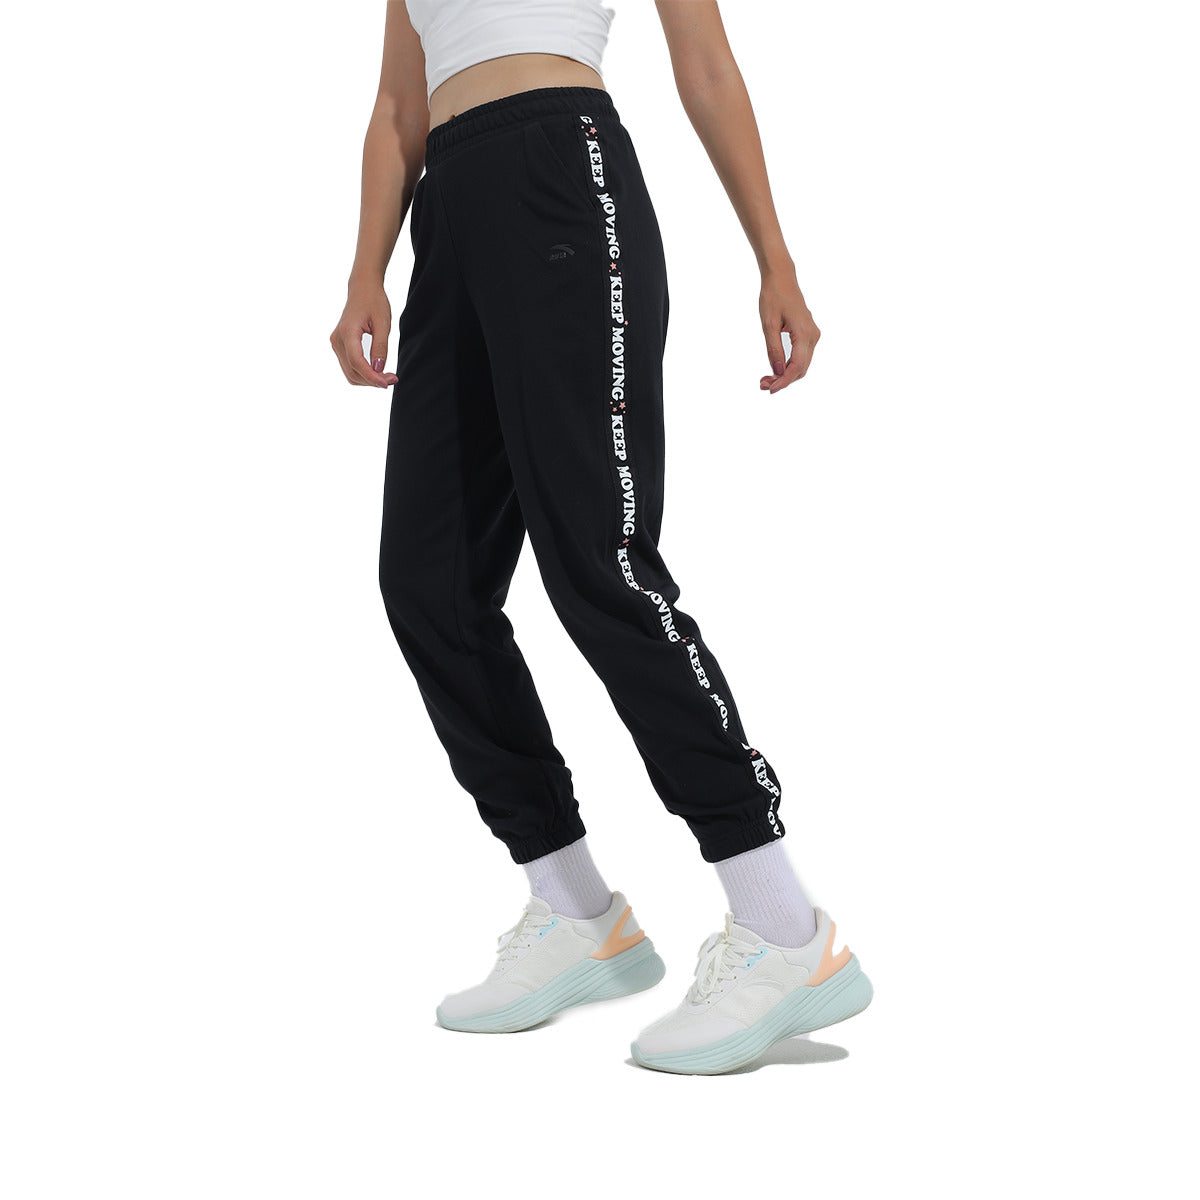 Anta Knit Track Casual Pants For Women, Black